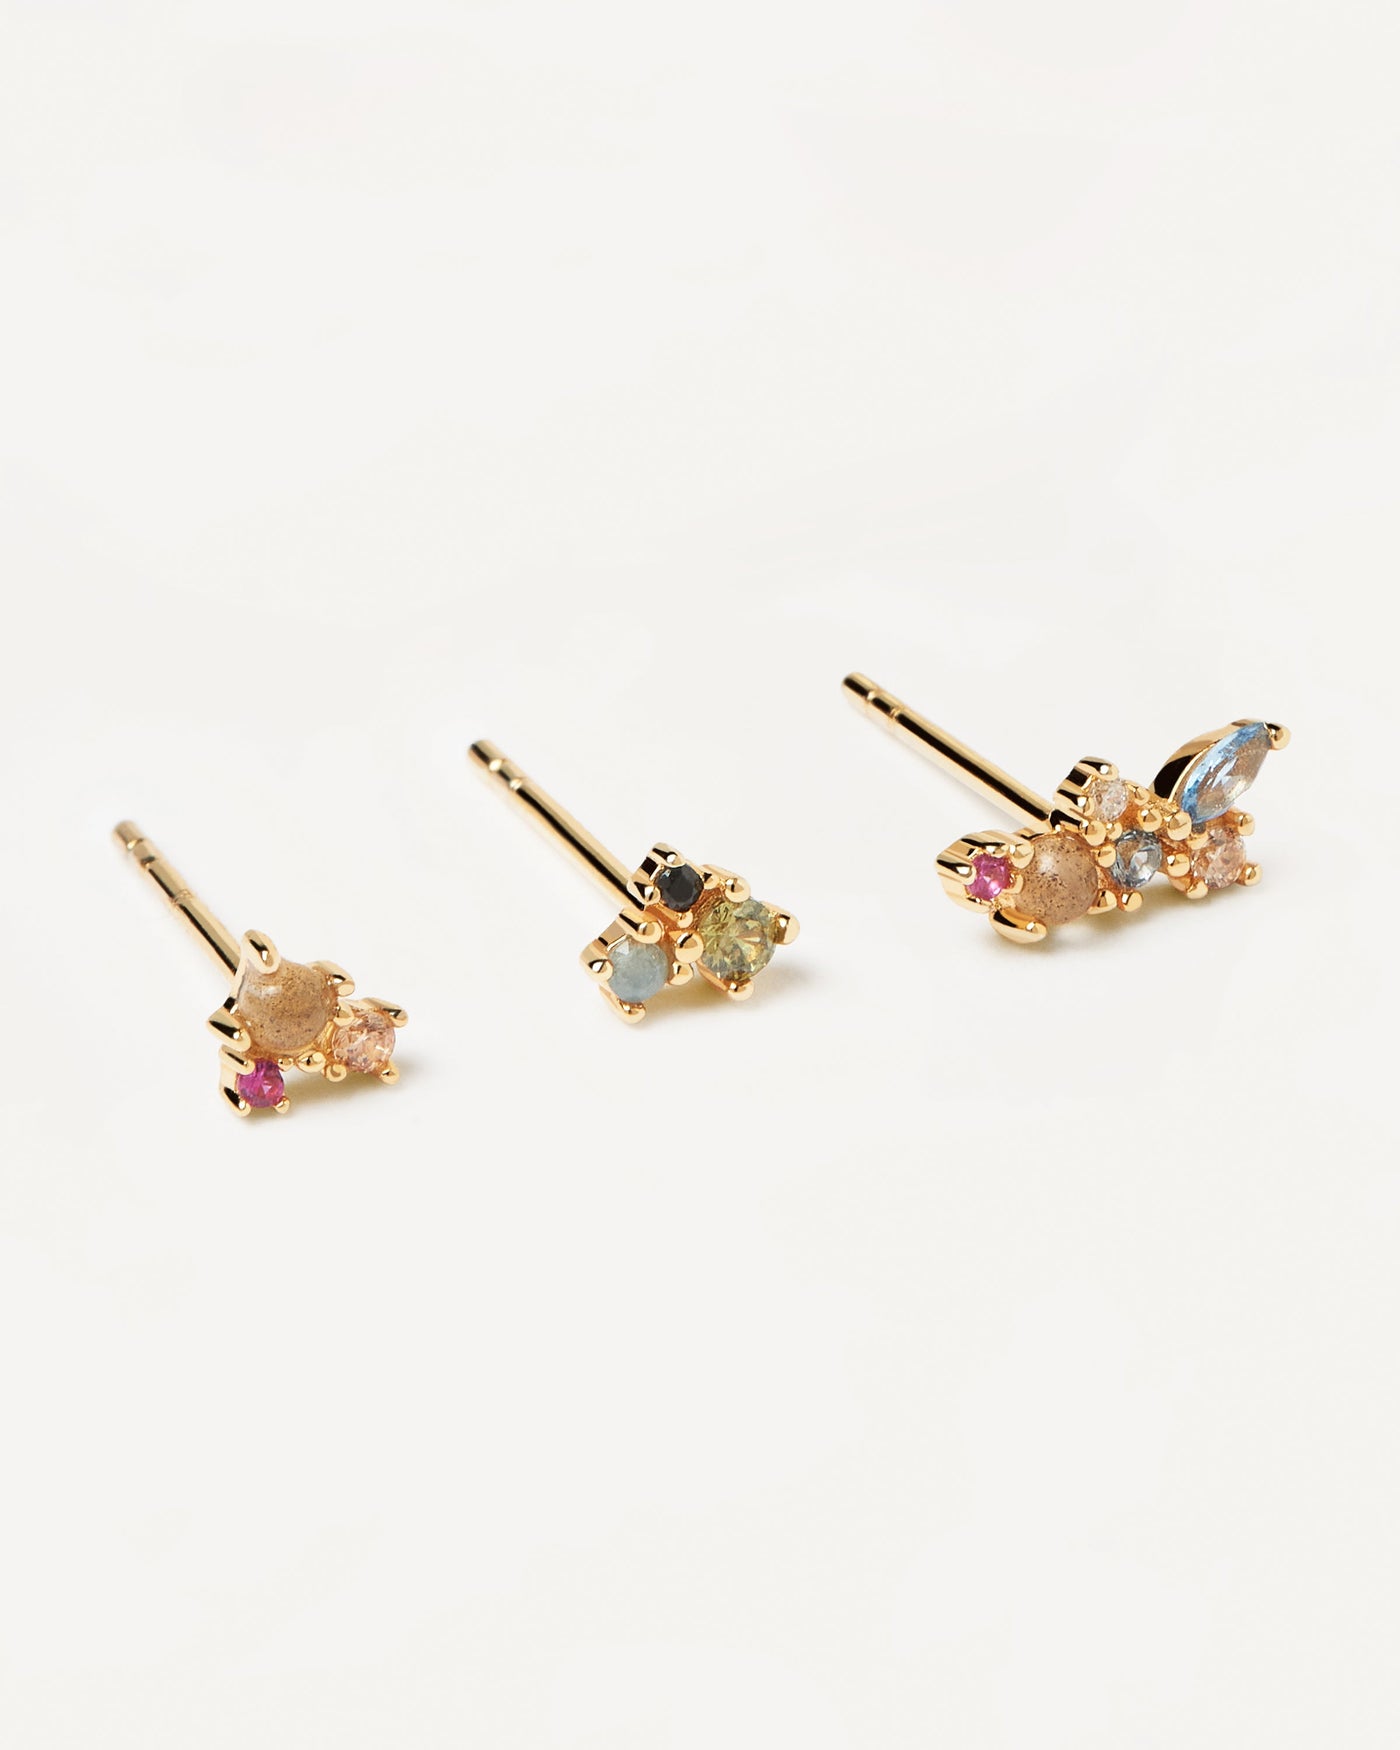 2023 Selection | La Palette Earrings Set. 3 single stud earrings with multicolor stones. Get the latest arrival from PDPAOLA. Place your order safely and get this Best Seller. Free Shipping.